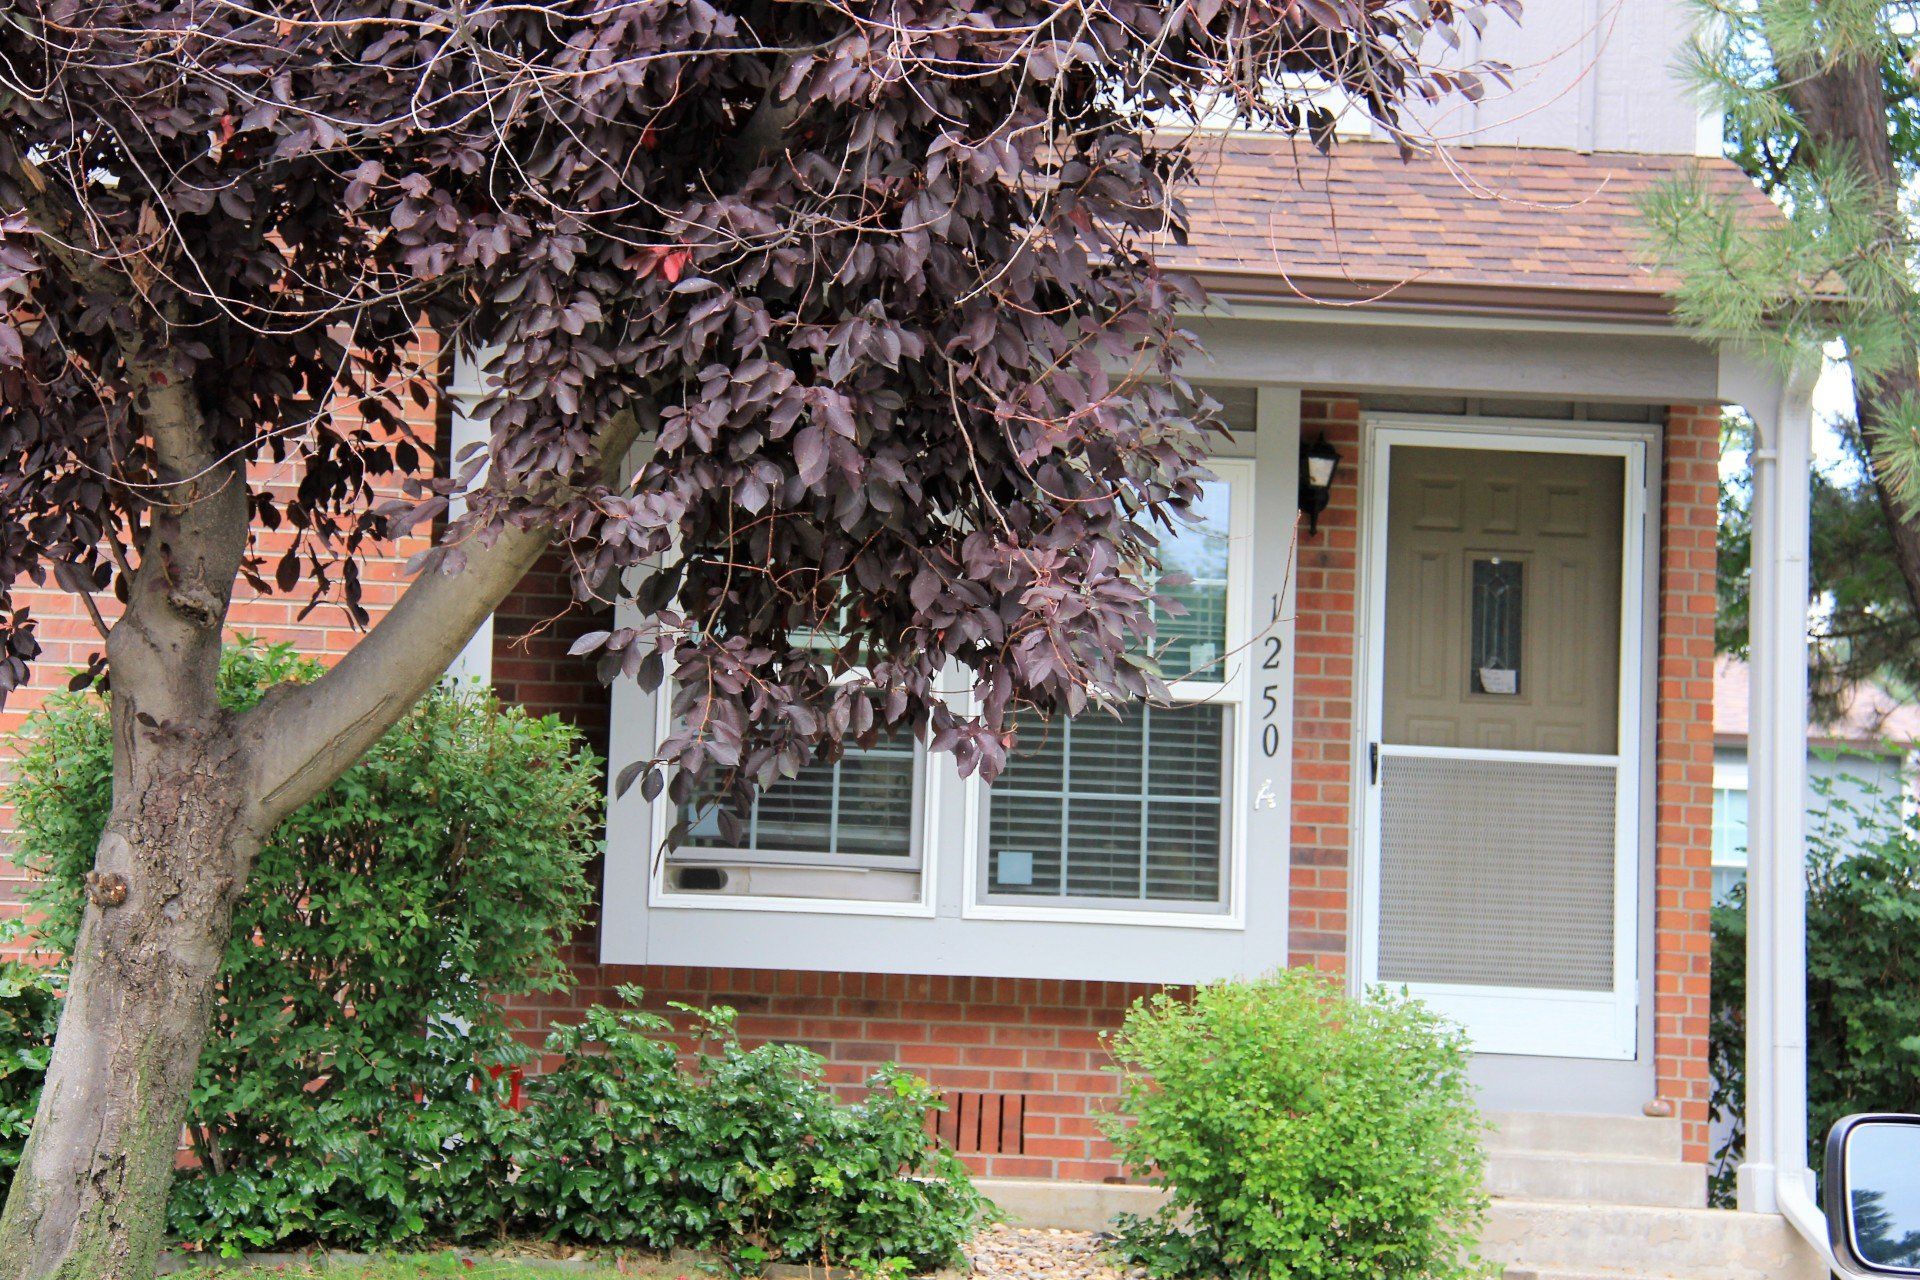 Check out our completed window and siding project (view is of front of residence).